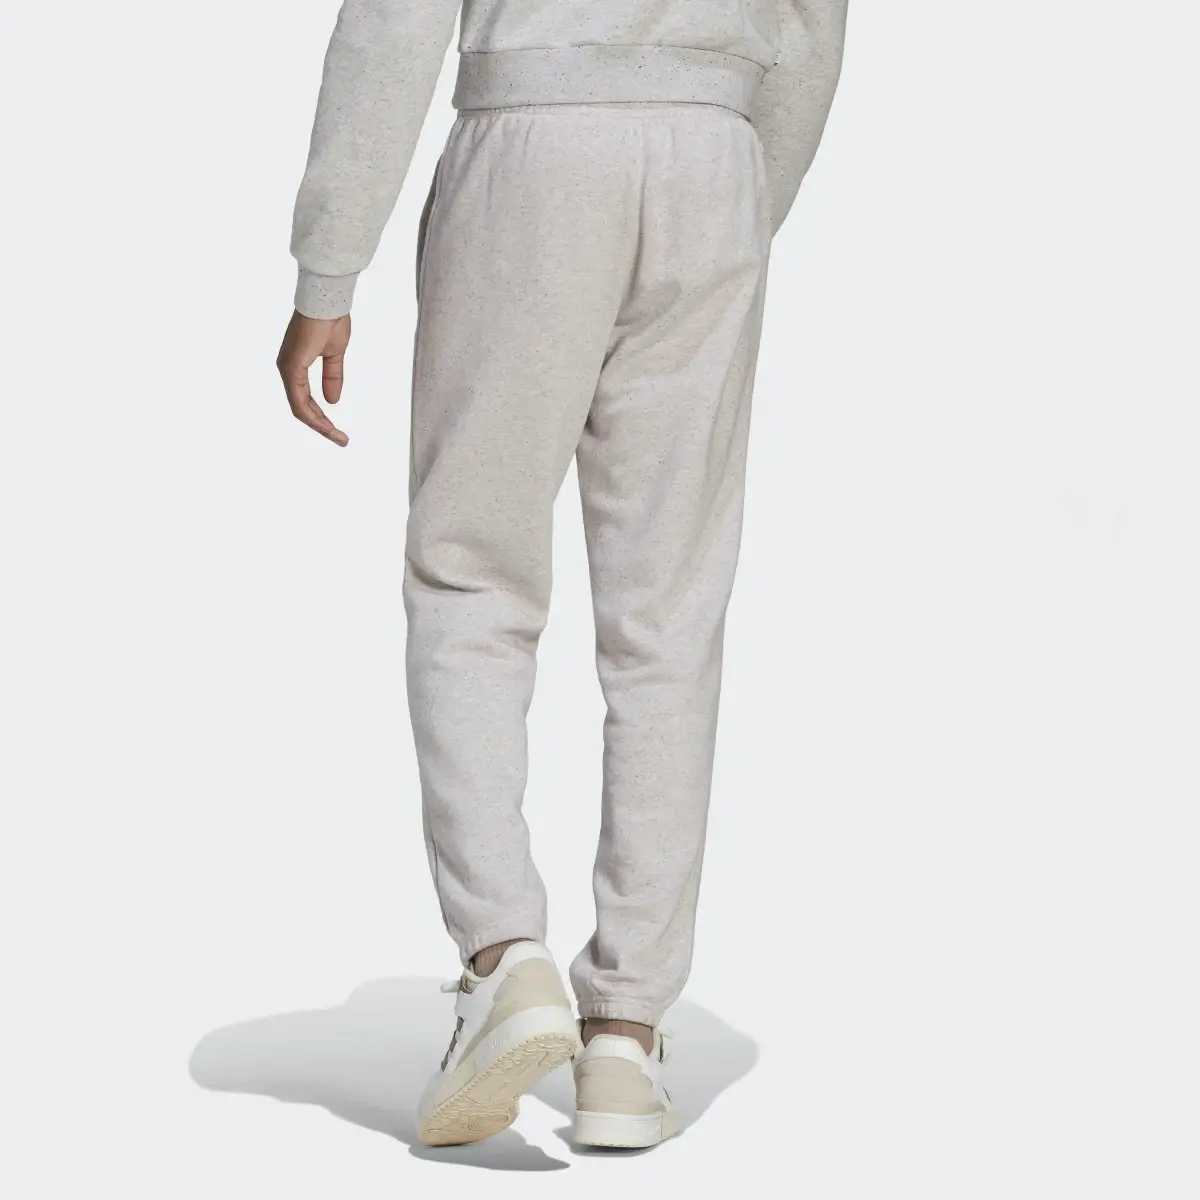 Adidas Essentials+ Made with Nature Sweat Pants. 3